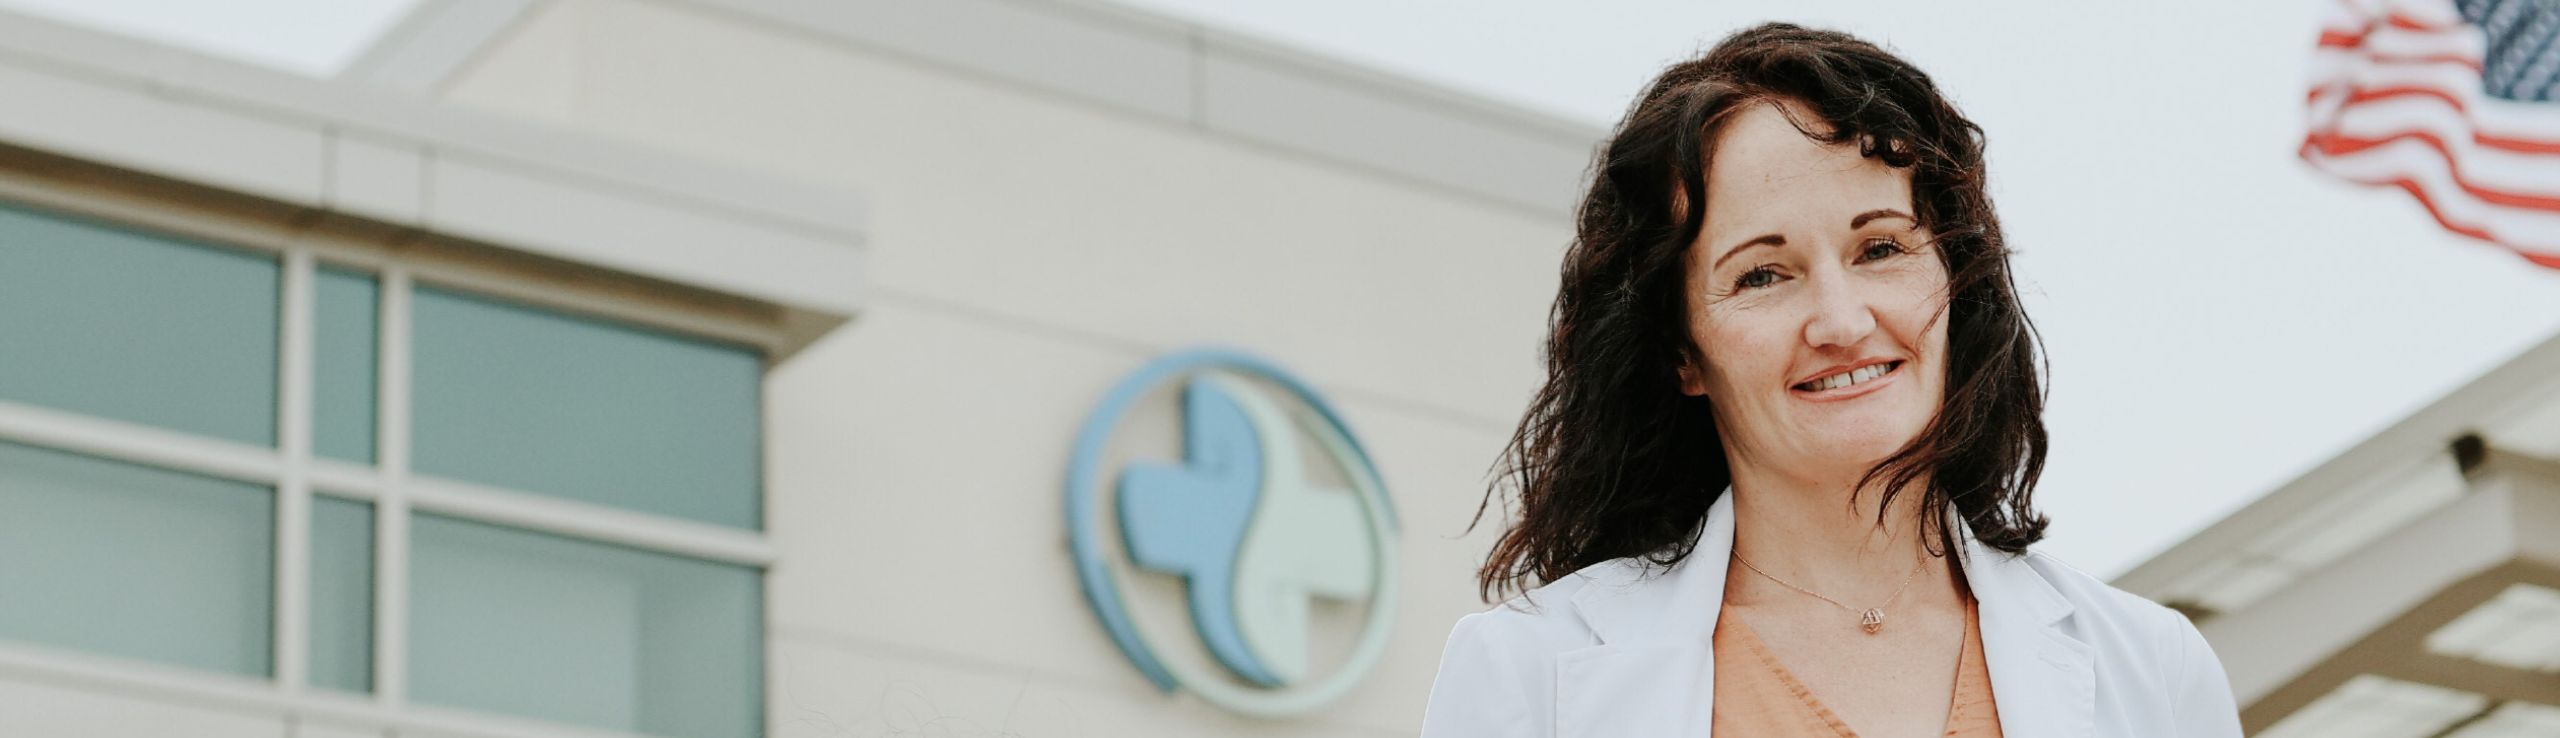 Dr. Jessica Crow standing in front of Hegg Health Center in Rock Valley, Iowa.